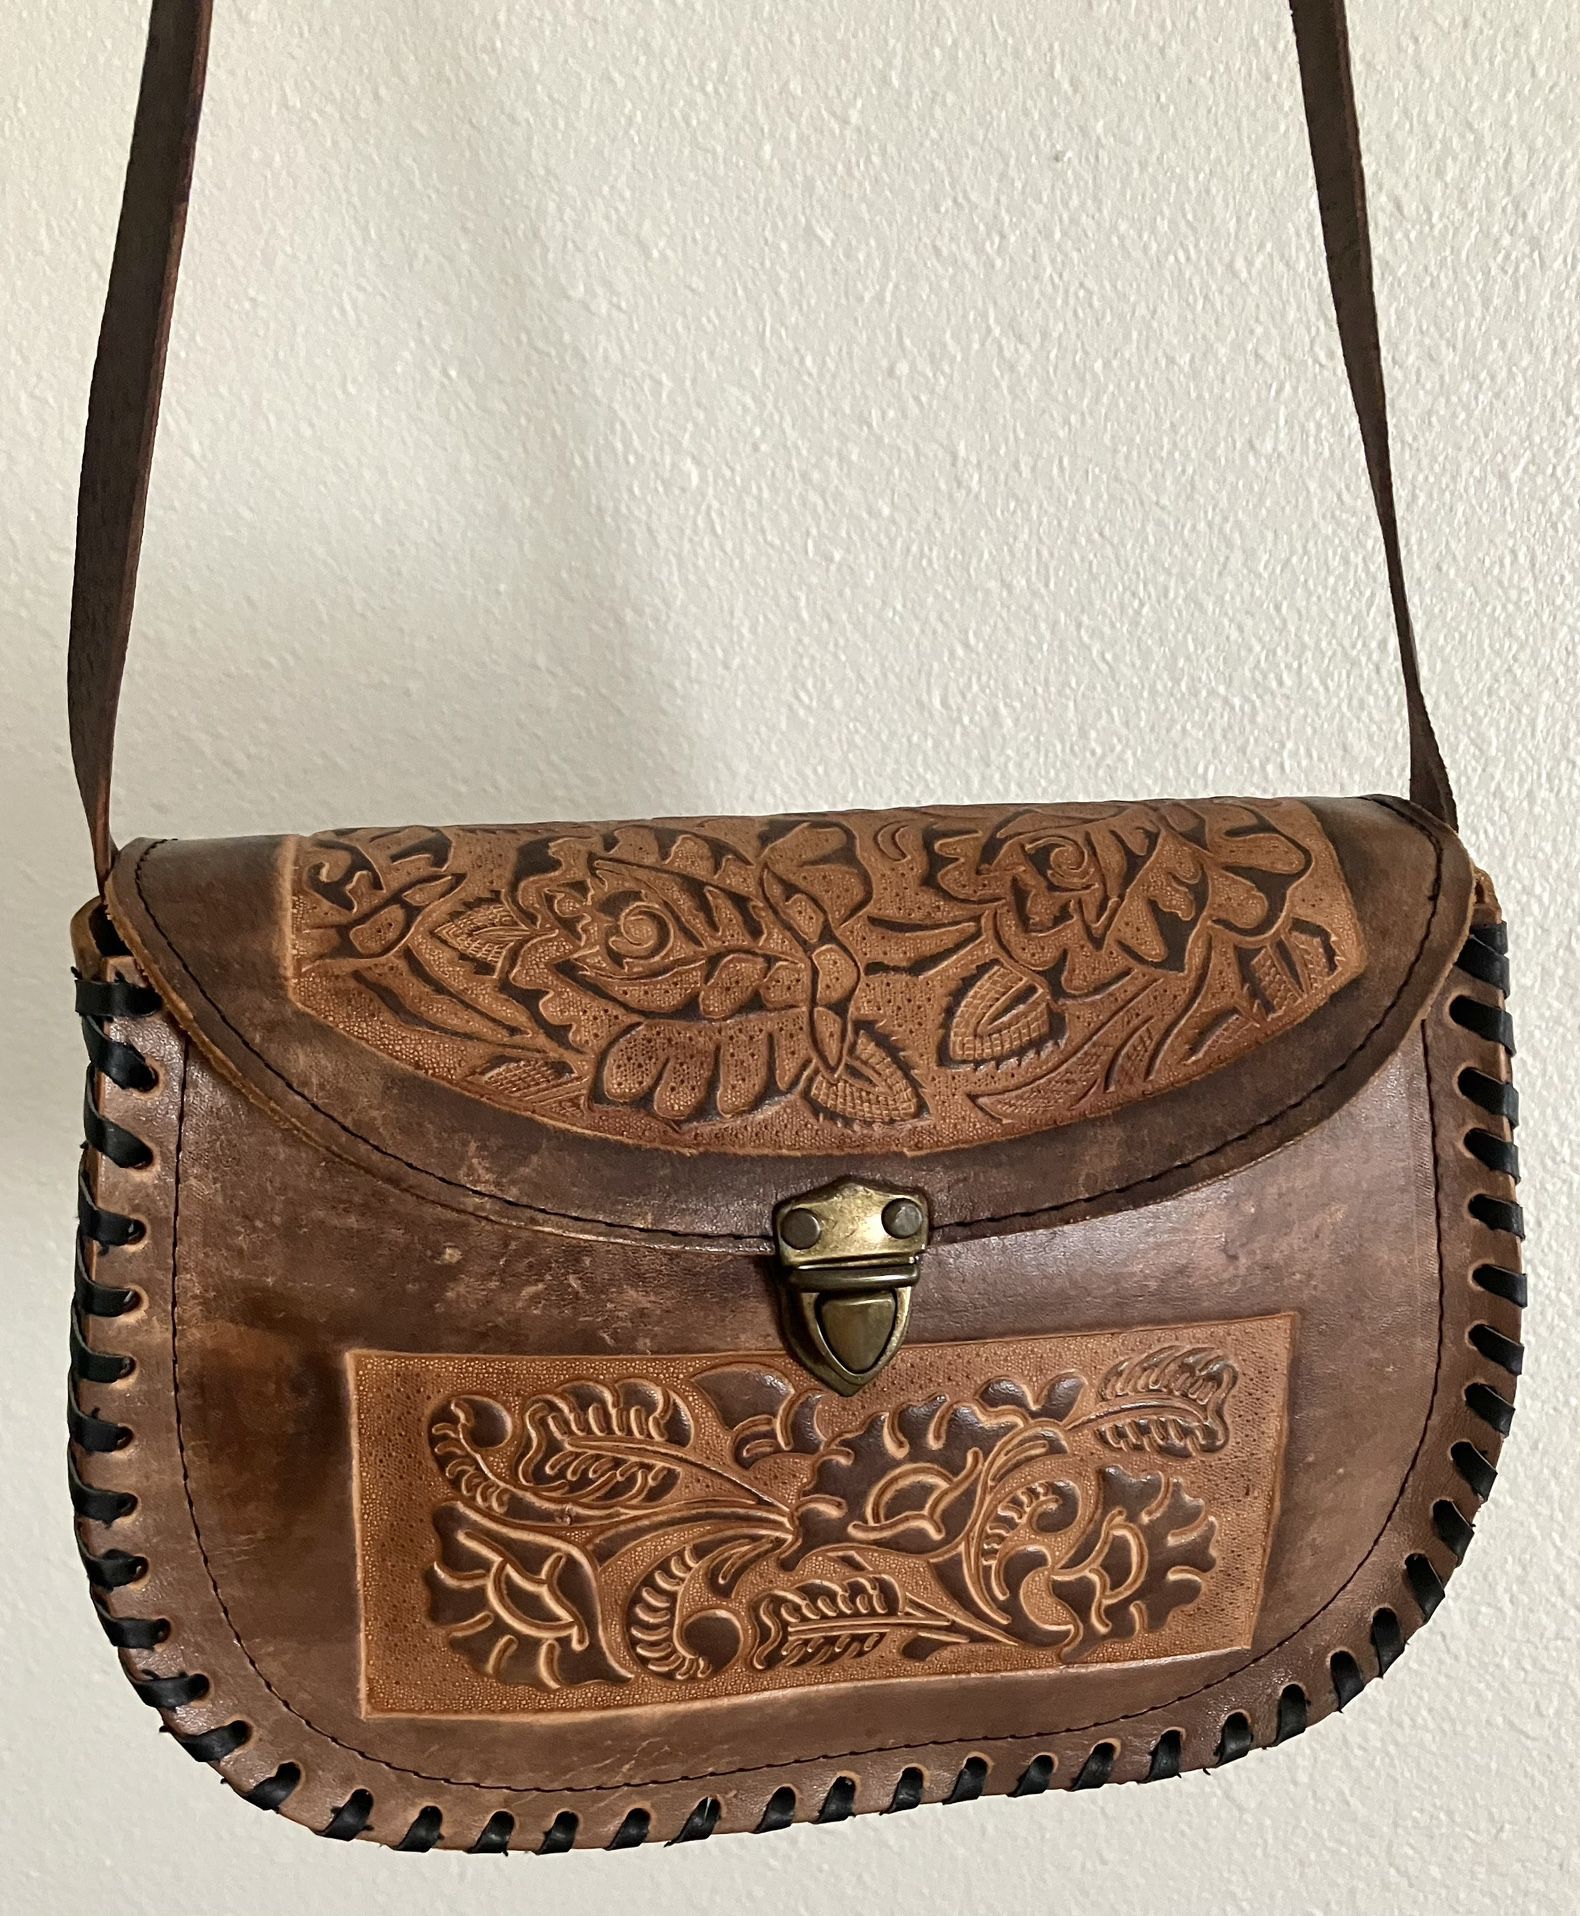 Mexican leather purse 🇲🇽